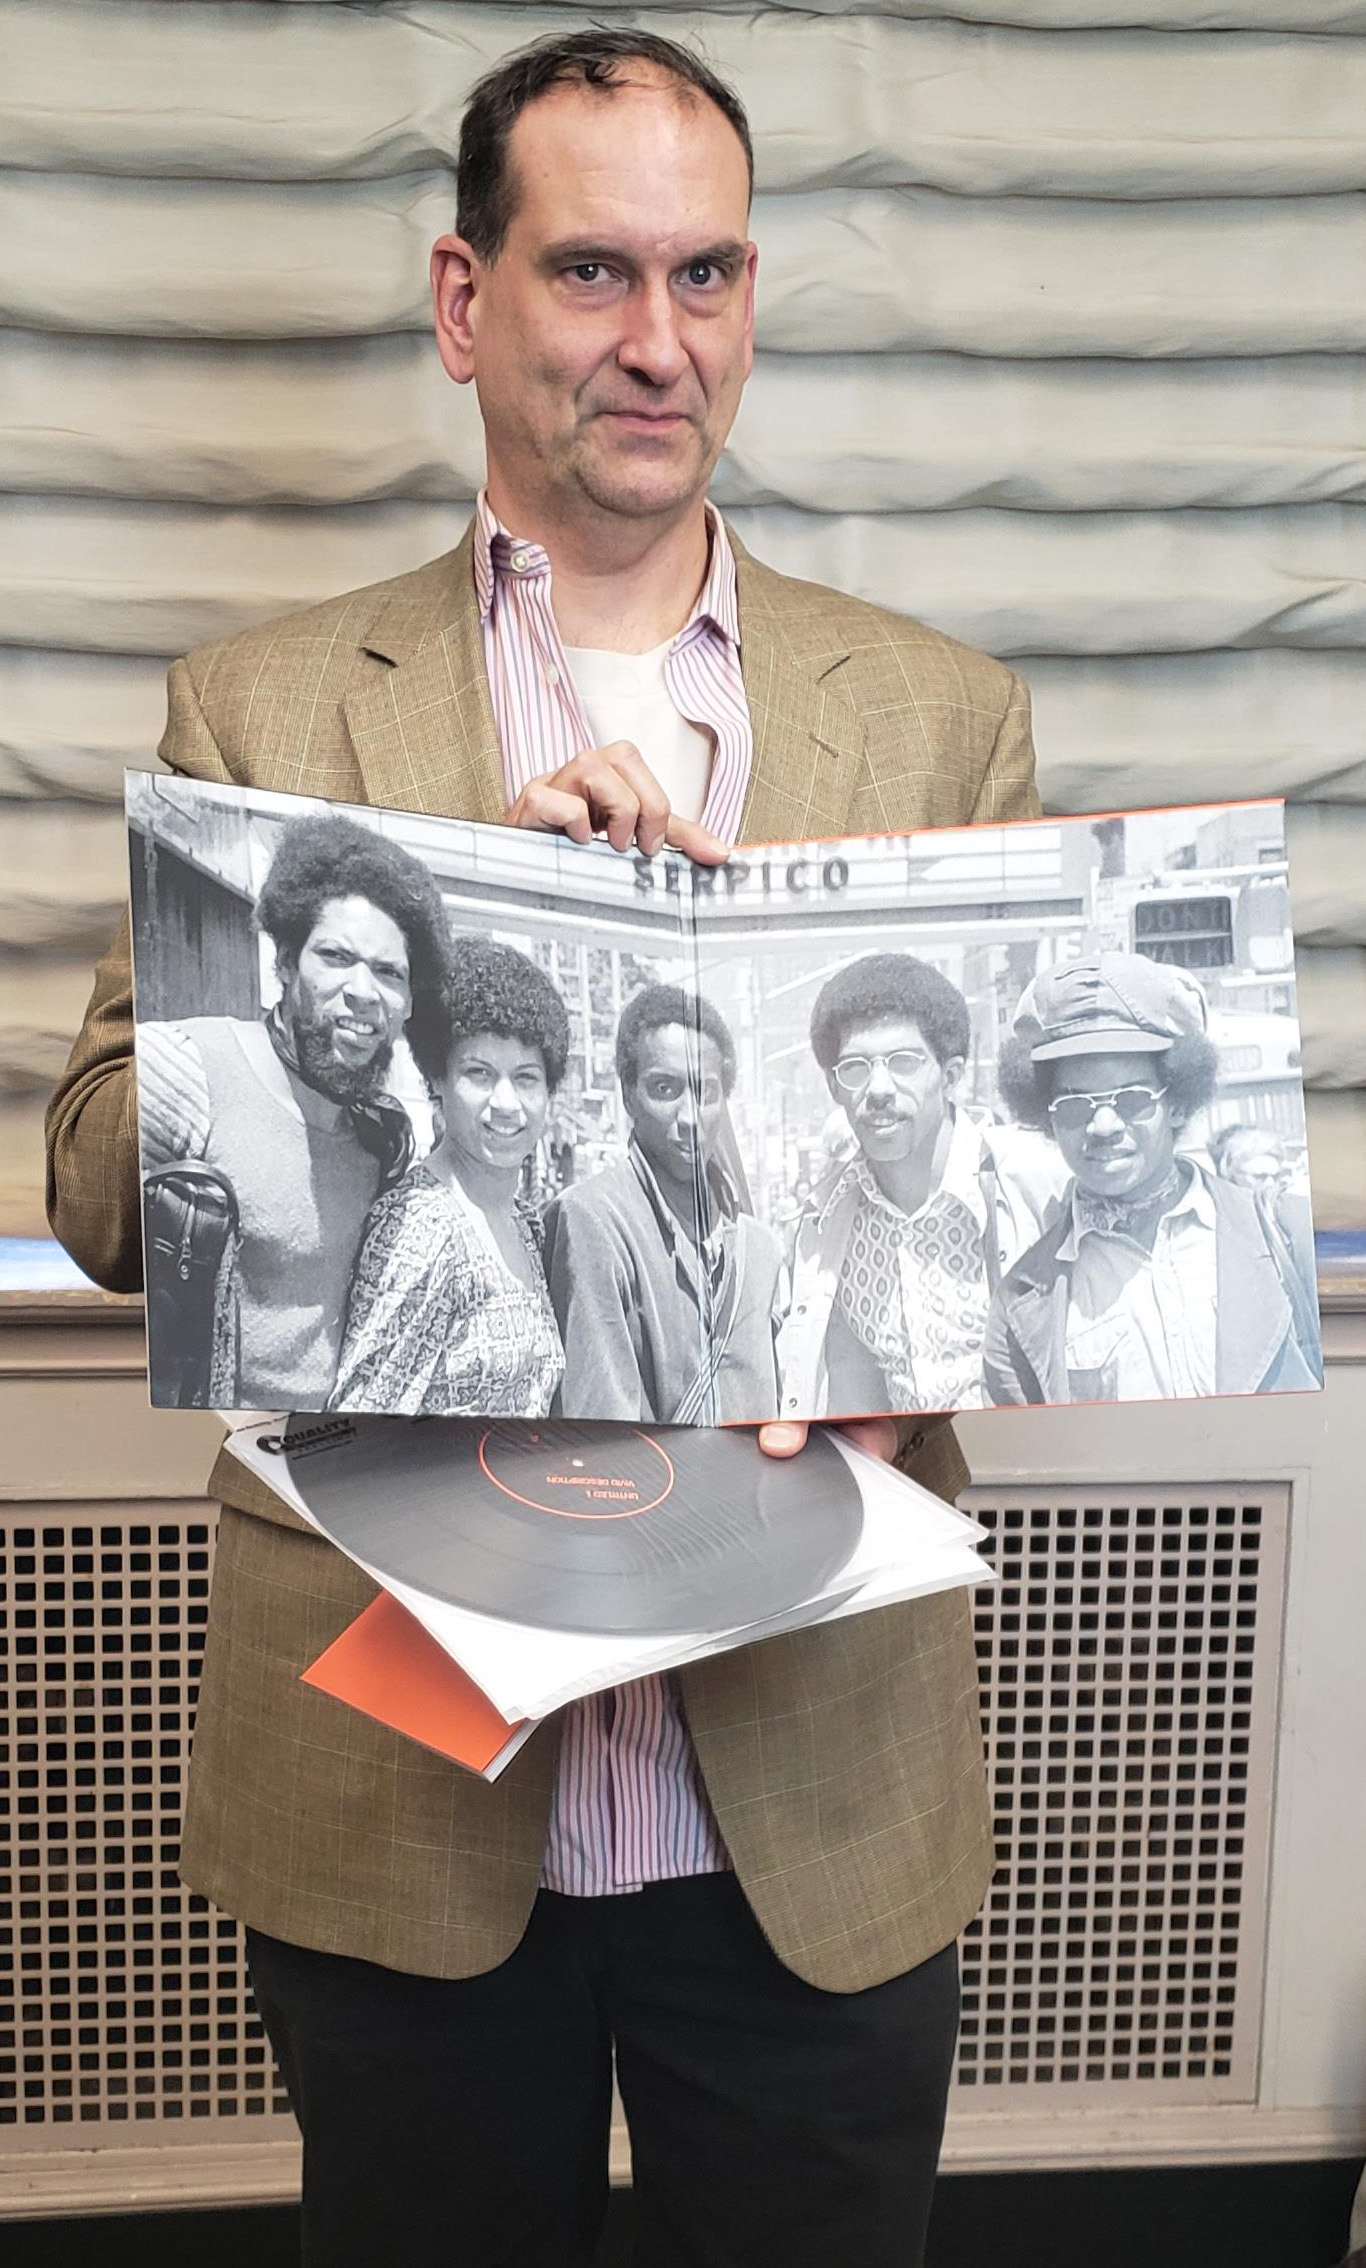 Ben Young holding one of his record's booklet